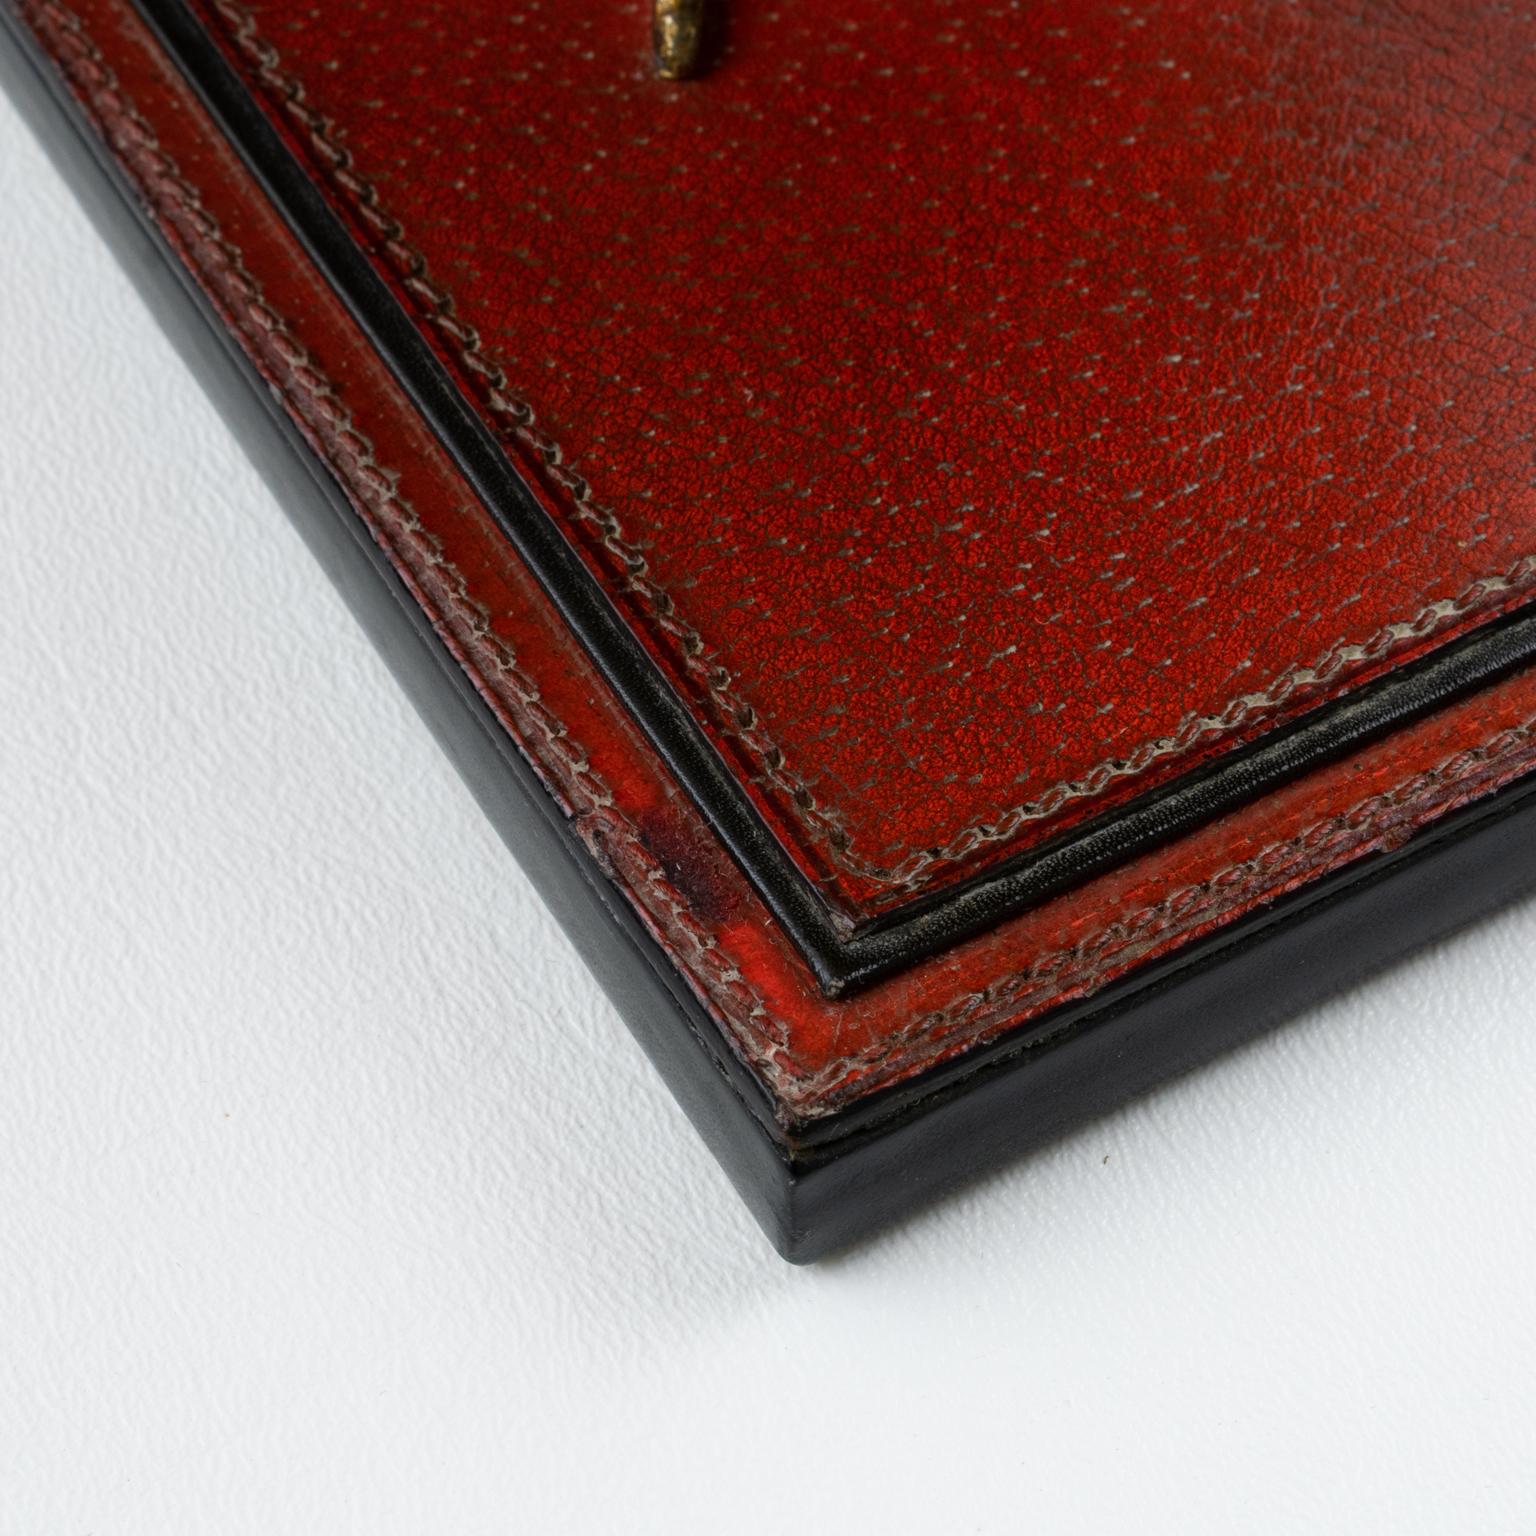 Gucci Italy Hand-Stitched Red Leather Bookends with Gilt Metal Partridges, 1970s For Sale 13